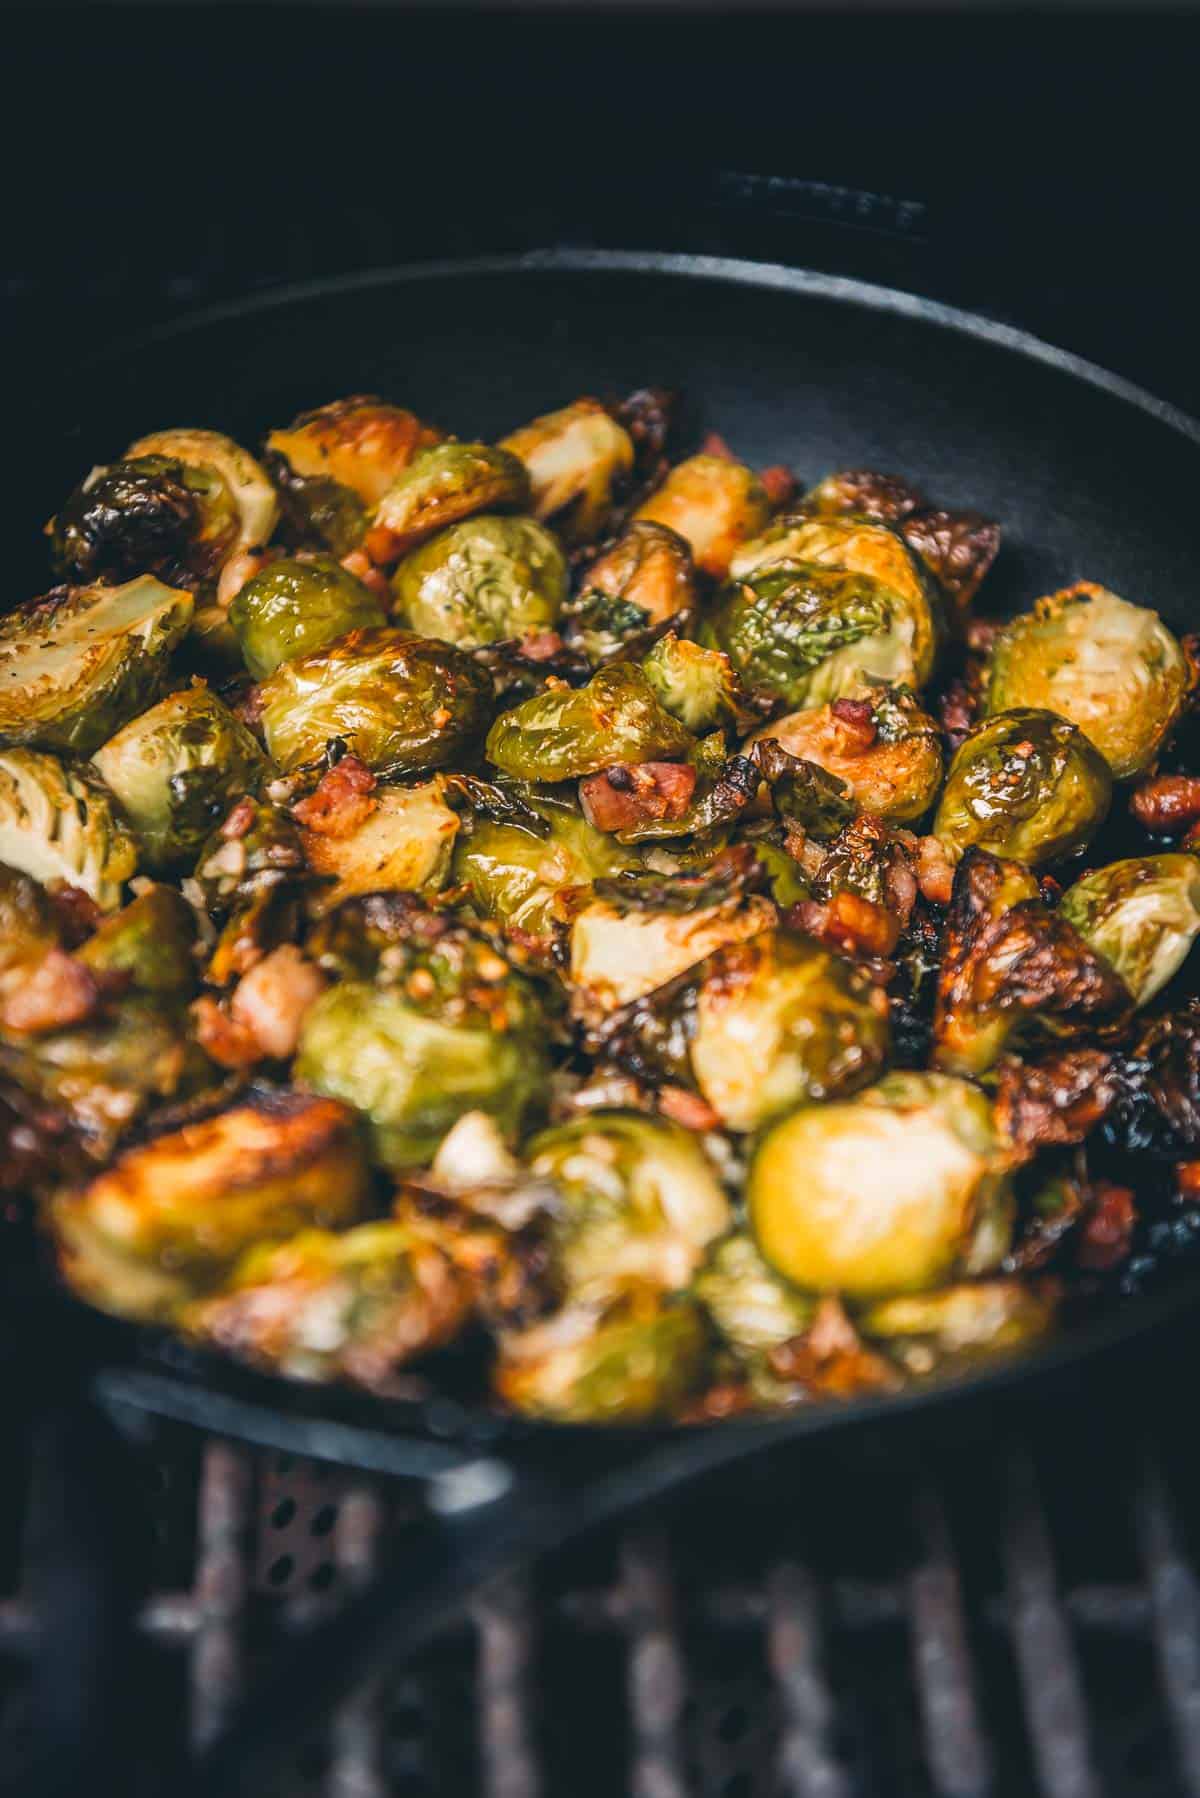 Brussels sprouts in a skillet on the grill.